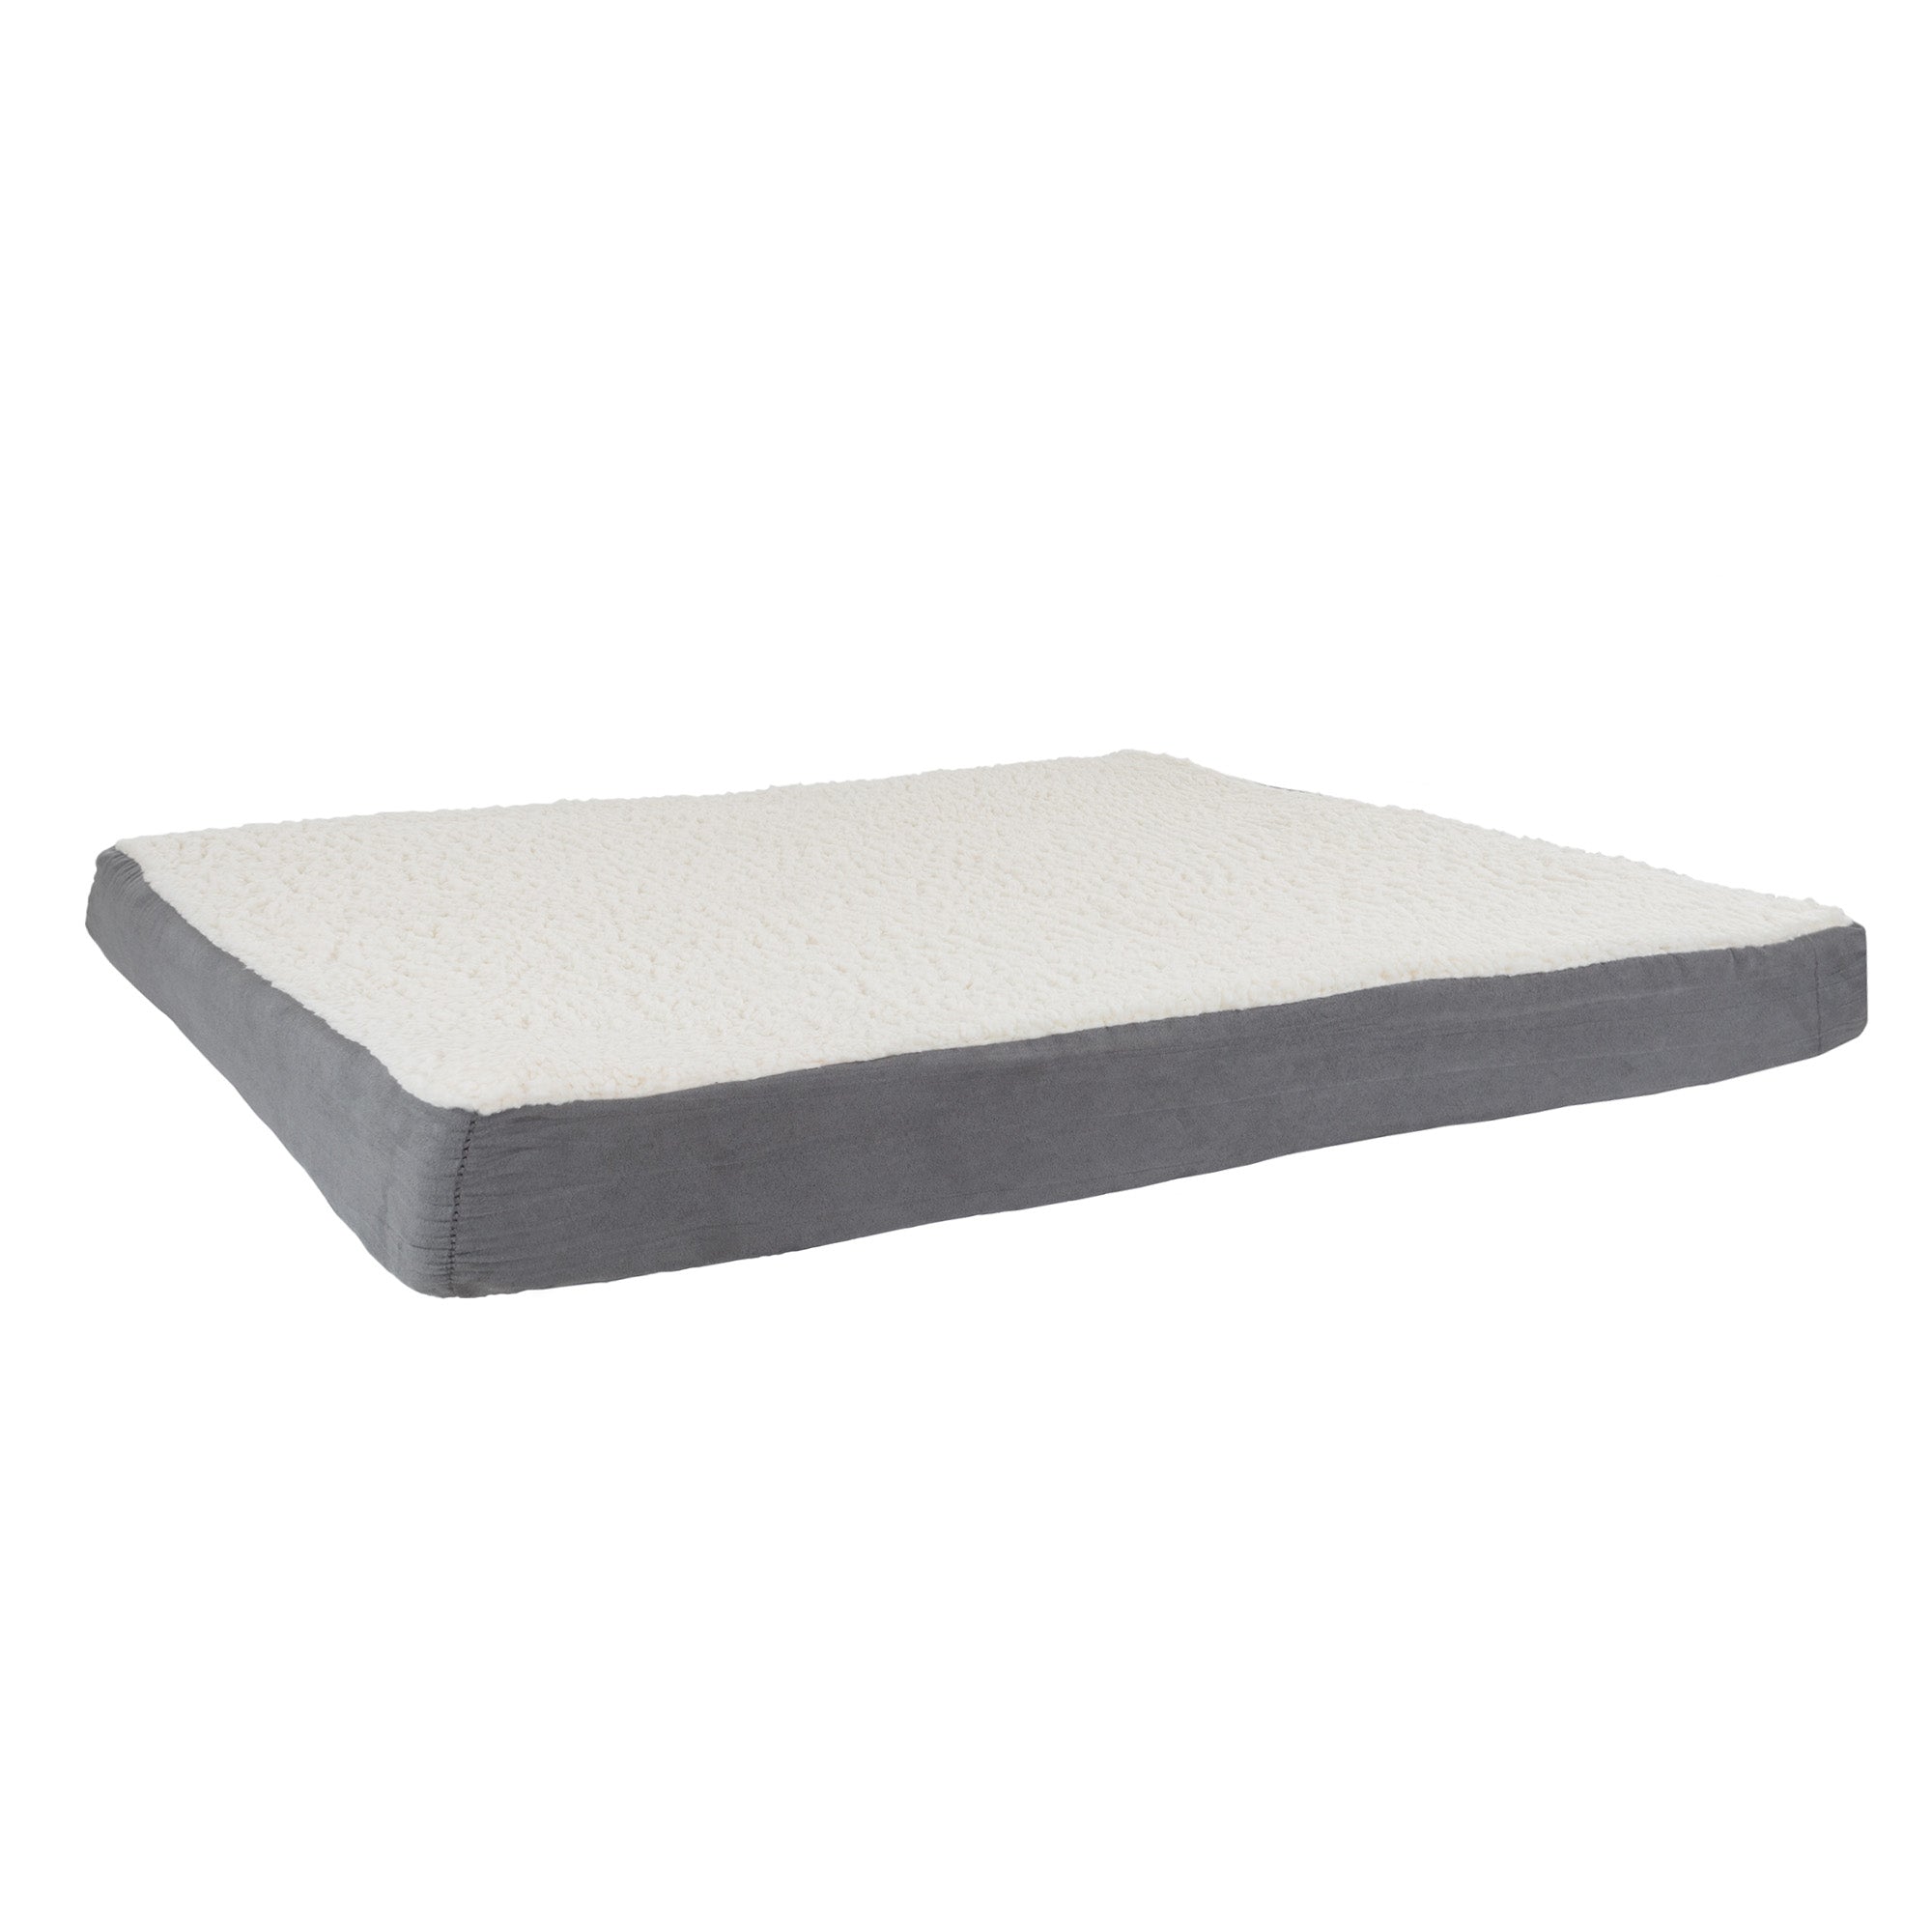 Orthopedic Dog Bed - 2-Layer 44x35-Inch Memory Foam Pet Mattress with Machine-Washable Sherpa Cover for Large Dogs up to 100lbs by PETMAKER (Gray)